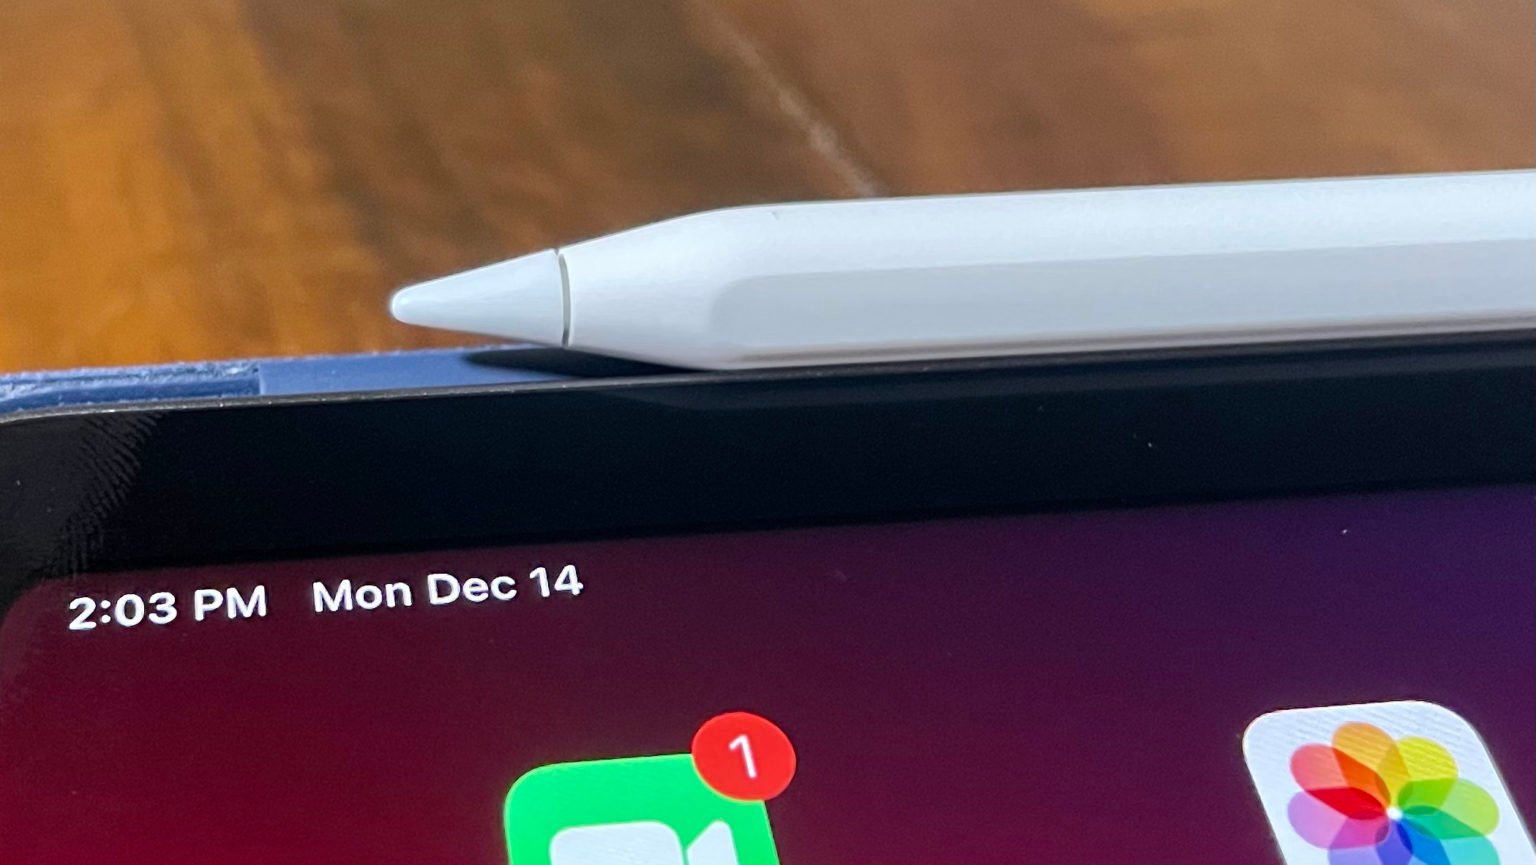 Pair Apple Pencil 2nd Generation To Your iPad UpPhone